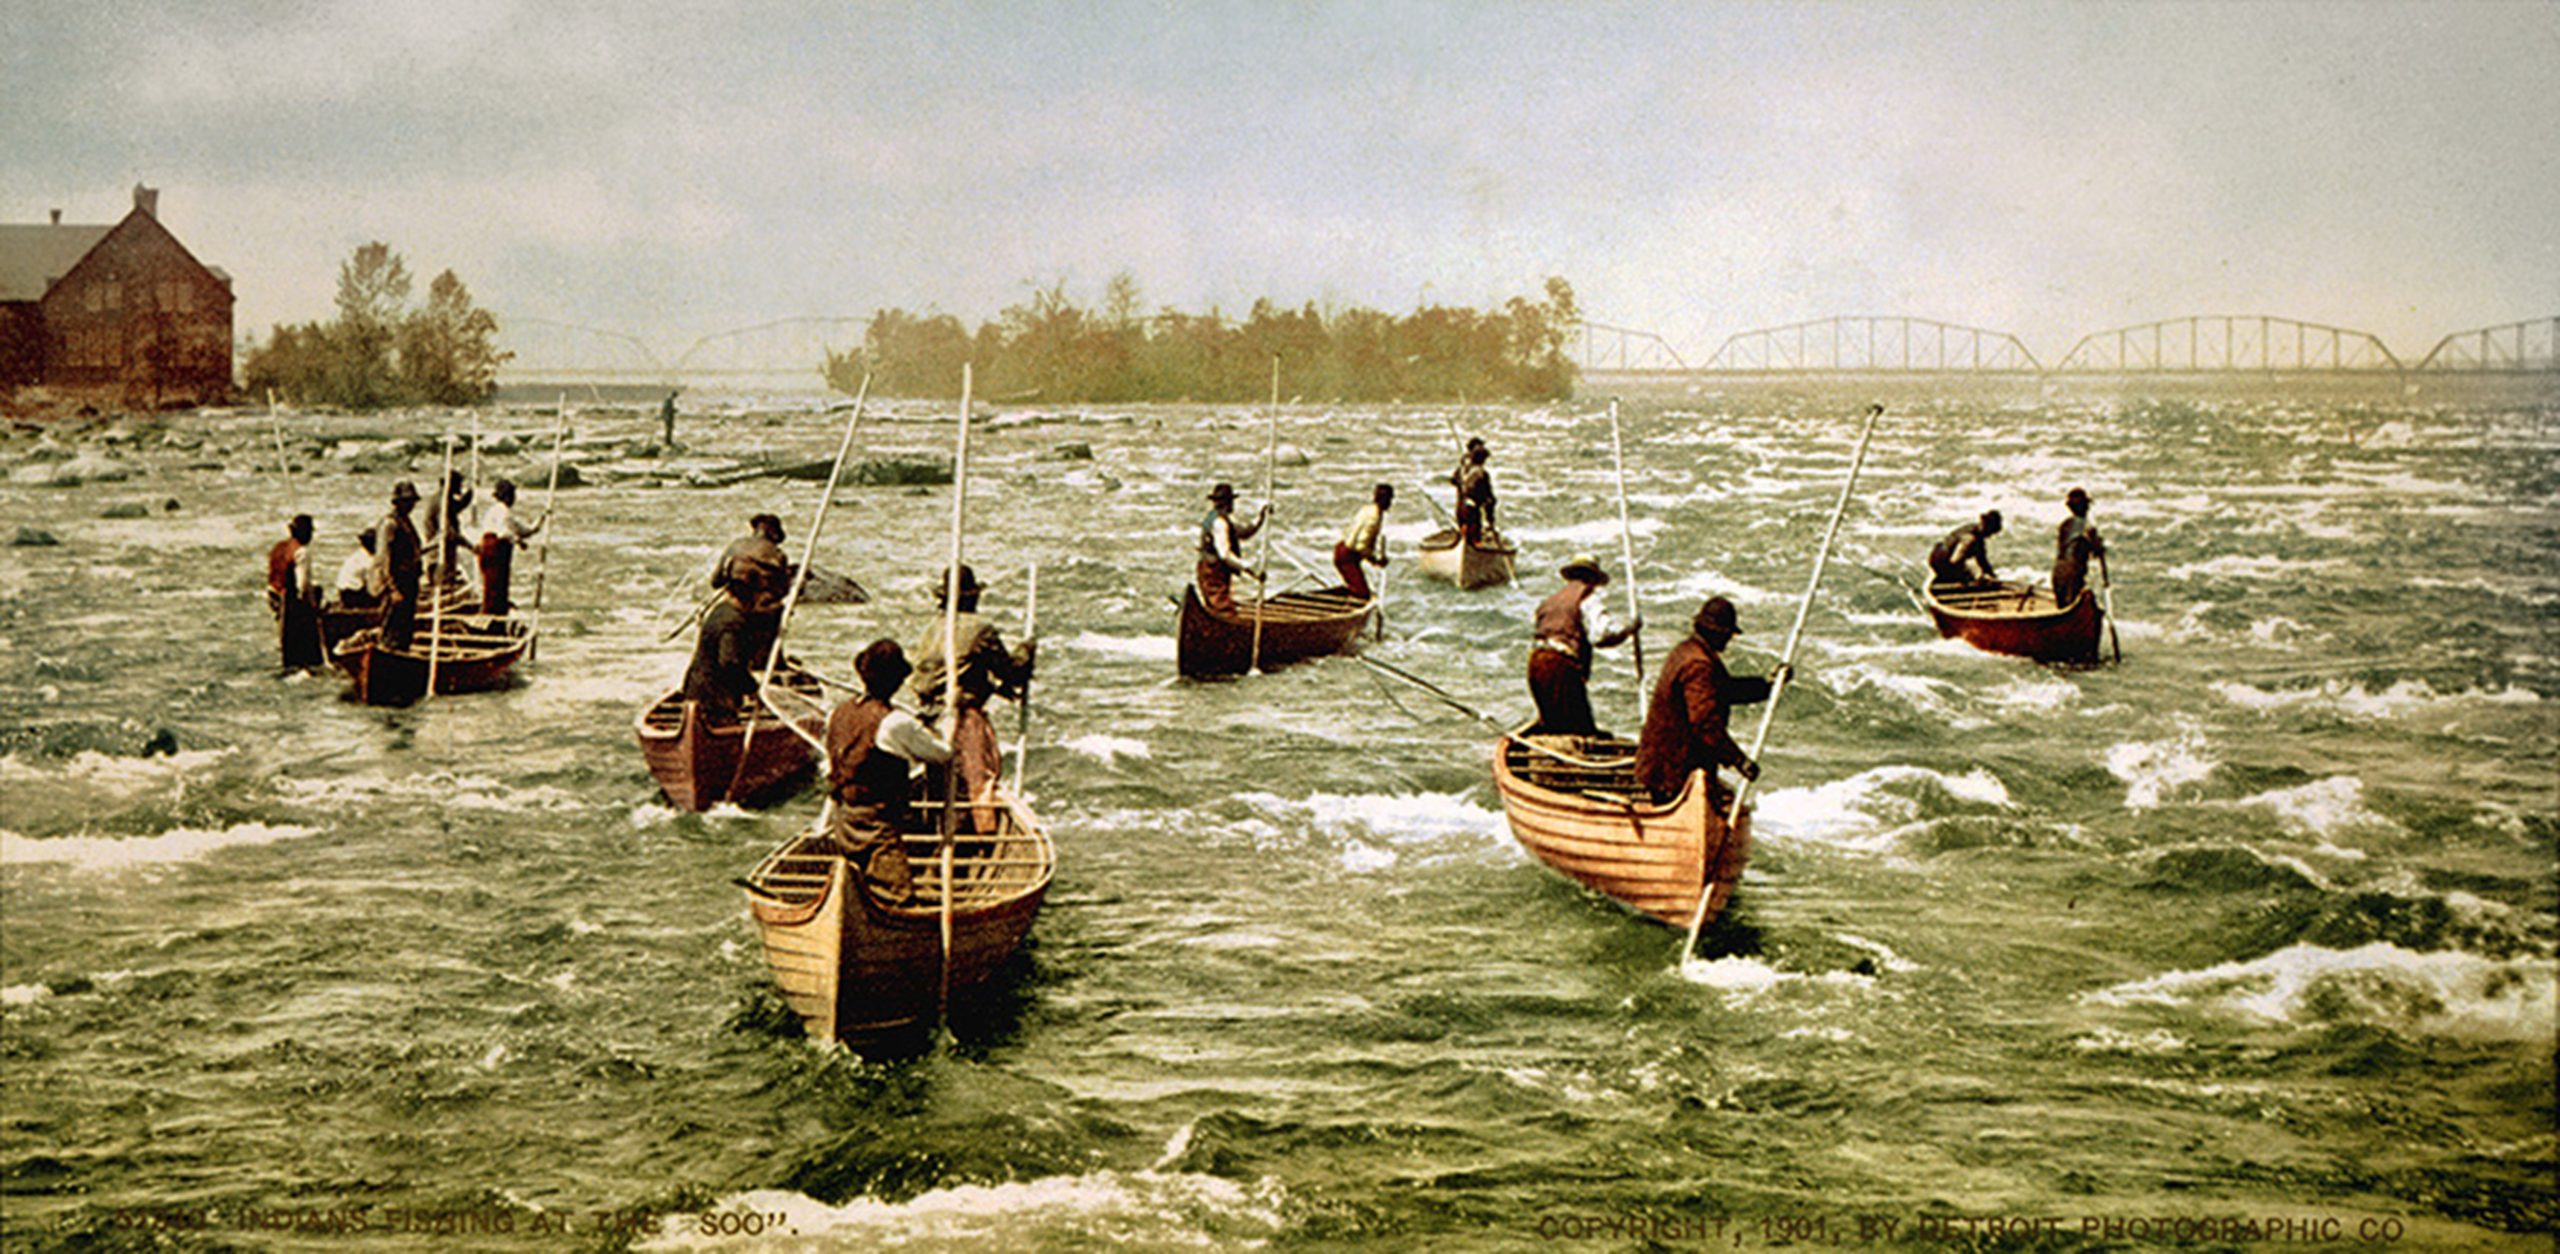 This picture shows the hunting men of Ojibwe (Fishers). They would go hunting on St. Mary's River for fish hunting during the season.